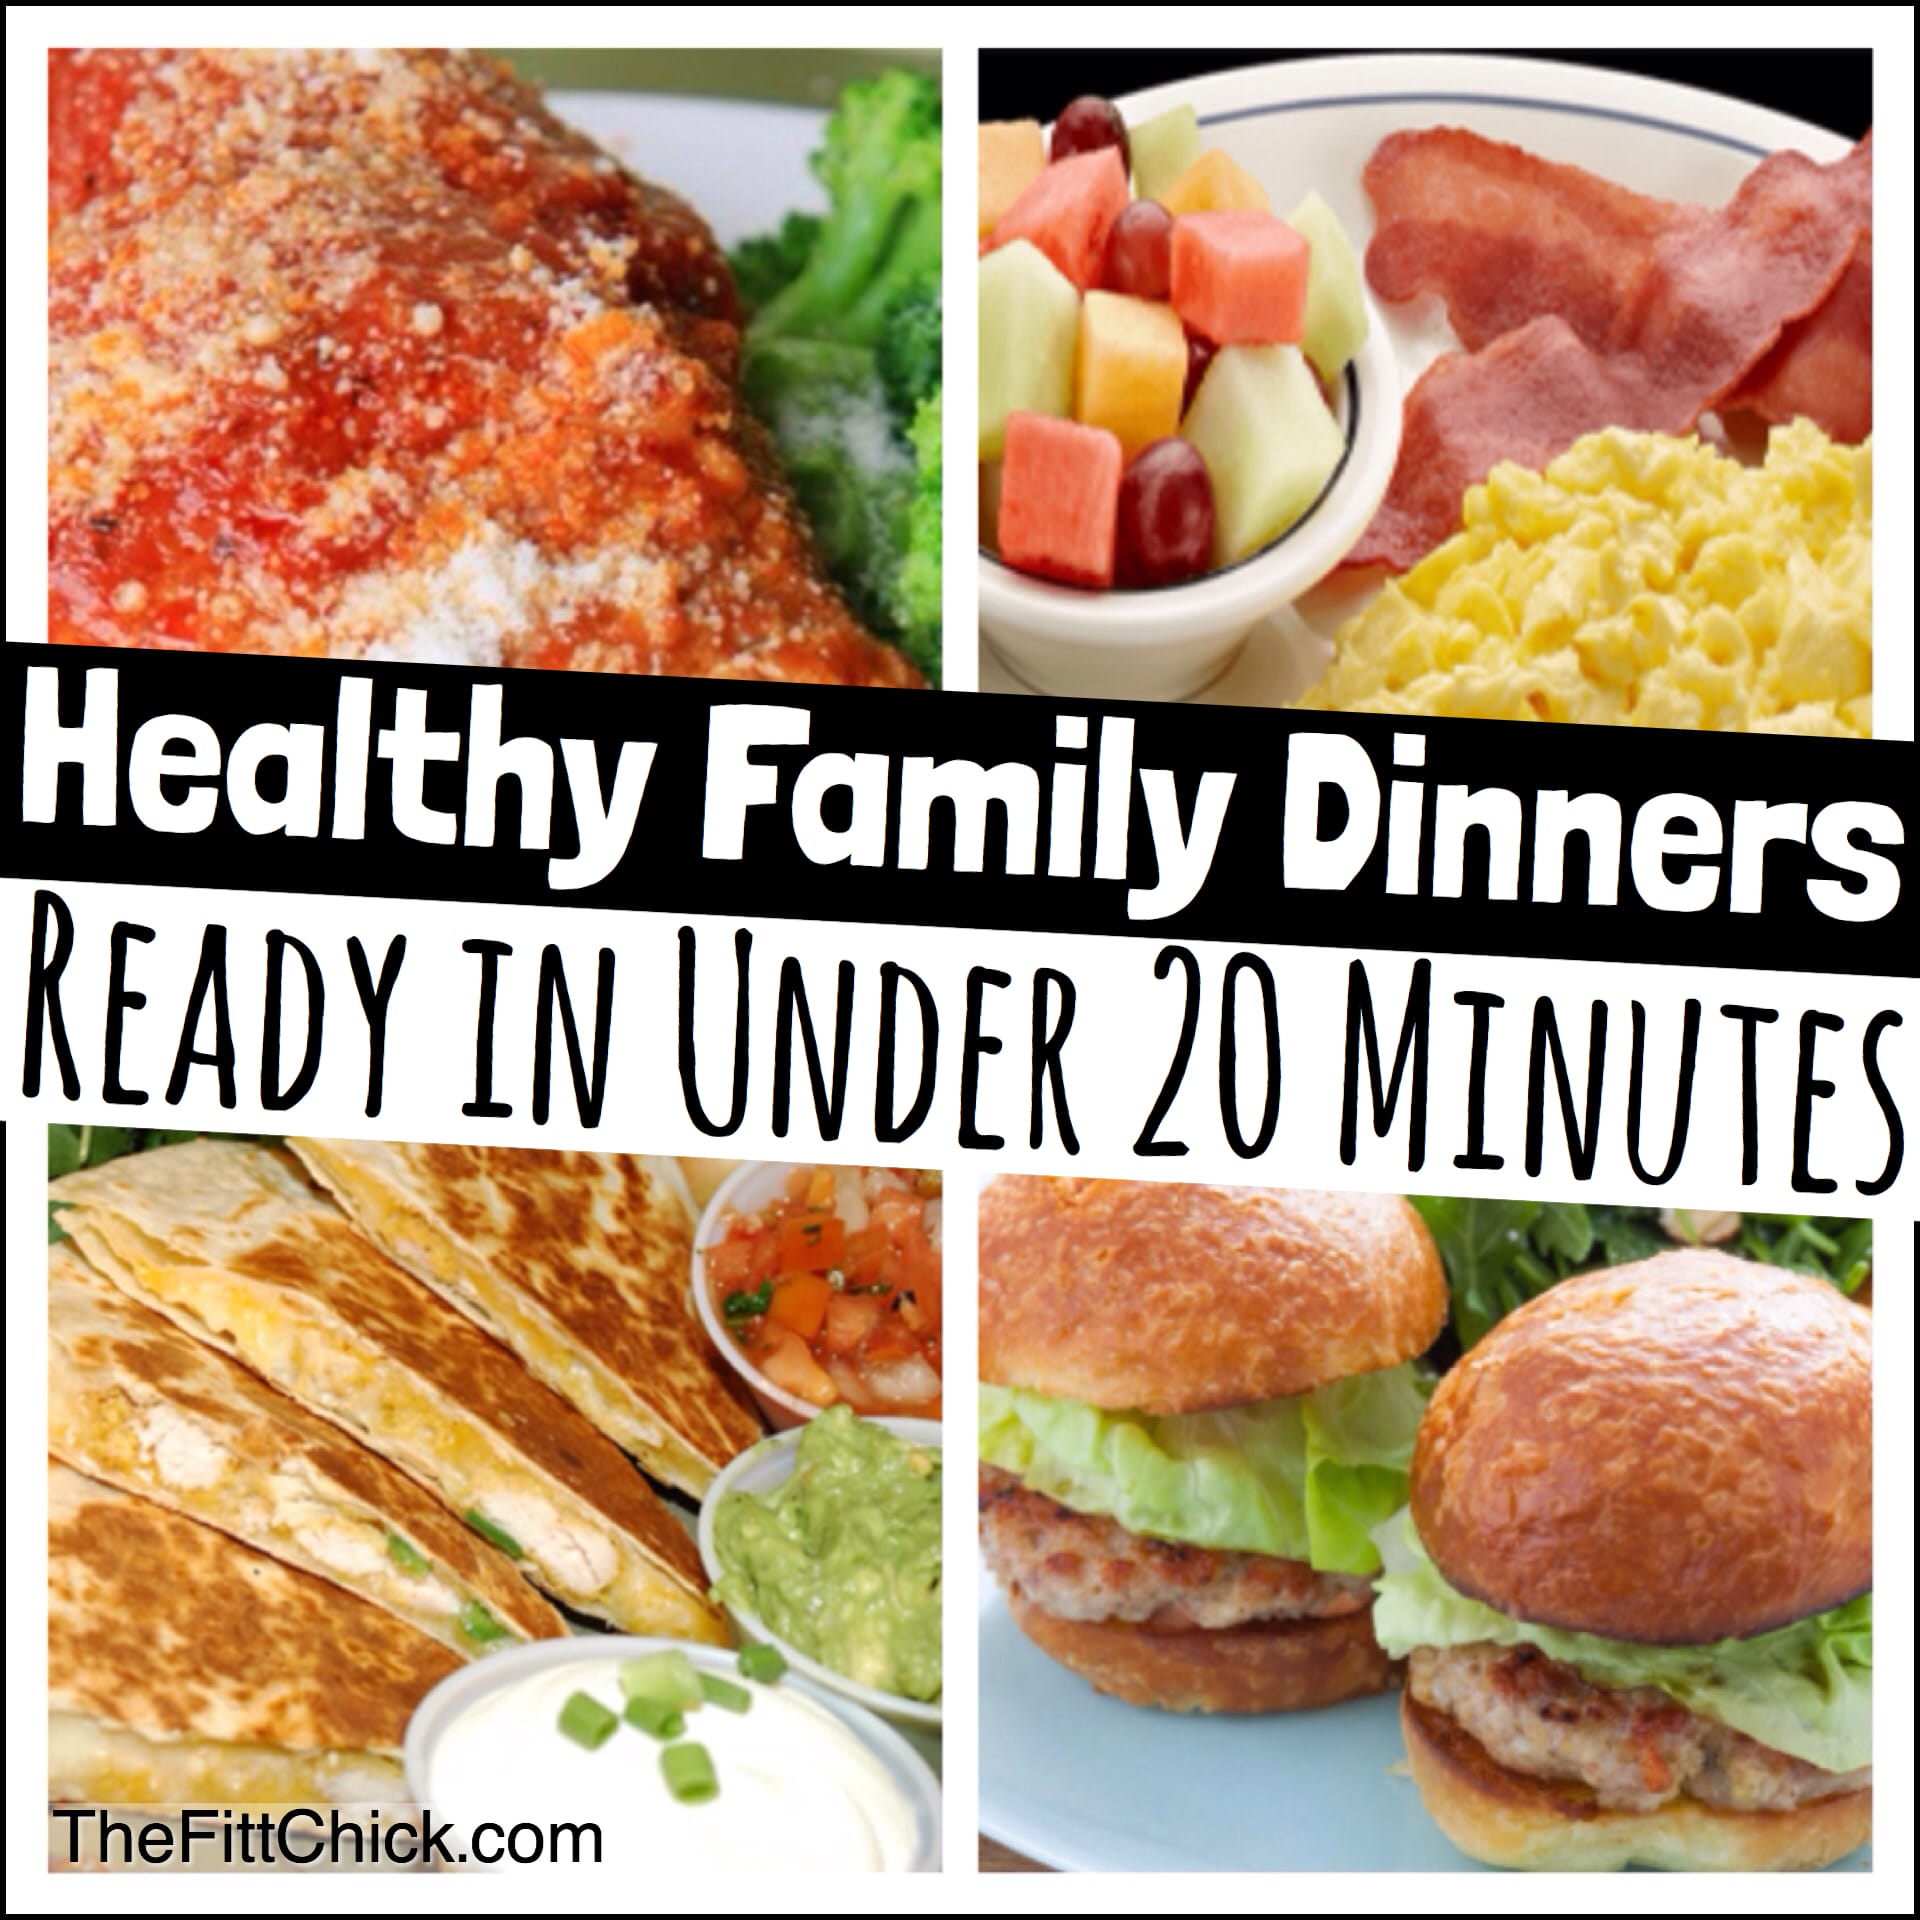 Healthy Family dinners in under 20 minutes